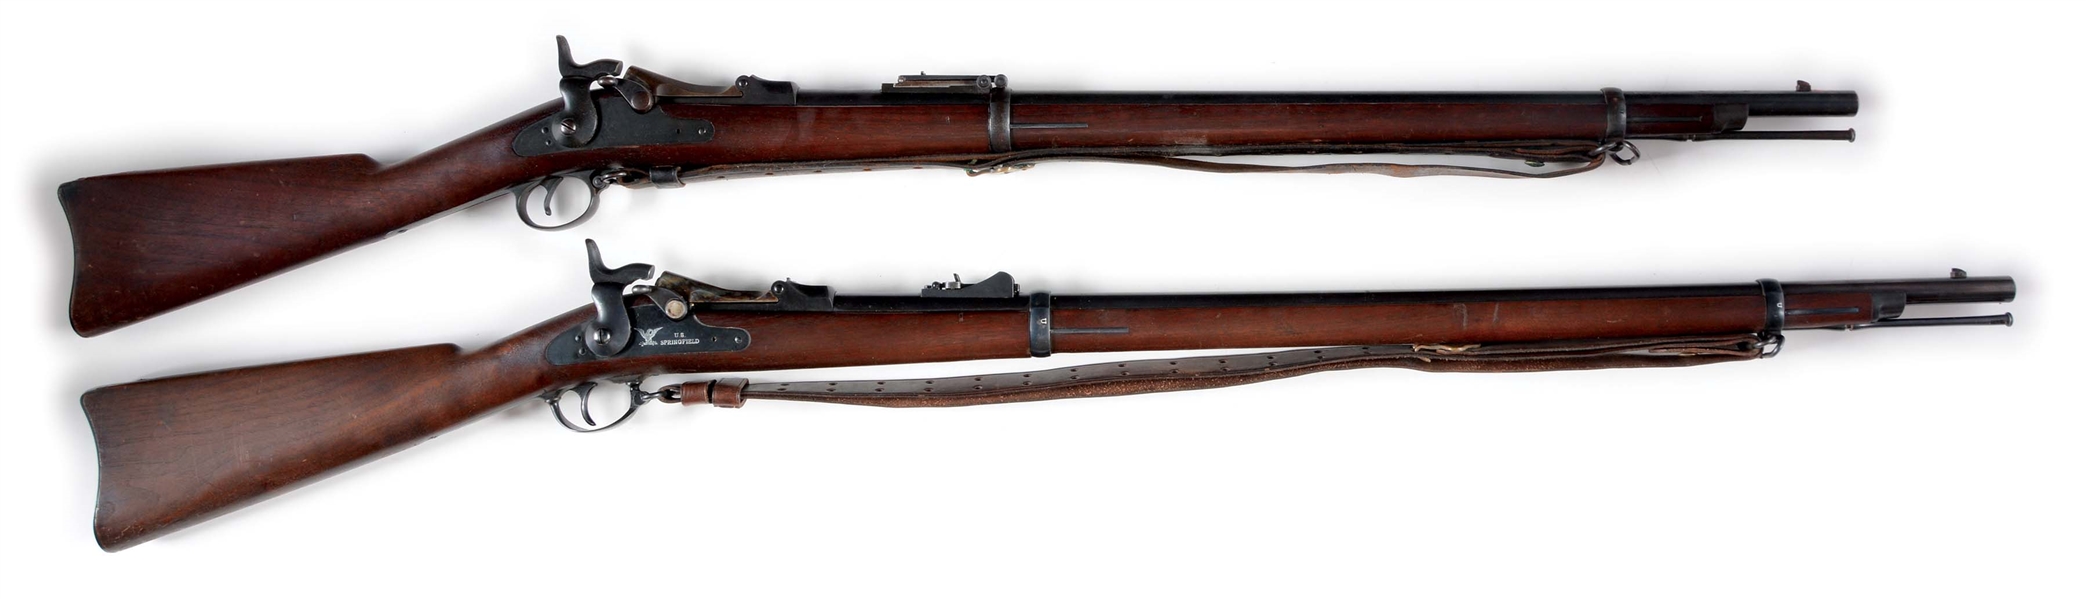 (A) EXCEPTIONAL SPRINGFIELD 1884 CADET RIFLE AND SPRINGFIELD 1878 TRAPDOOR RIFLE